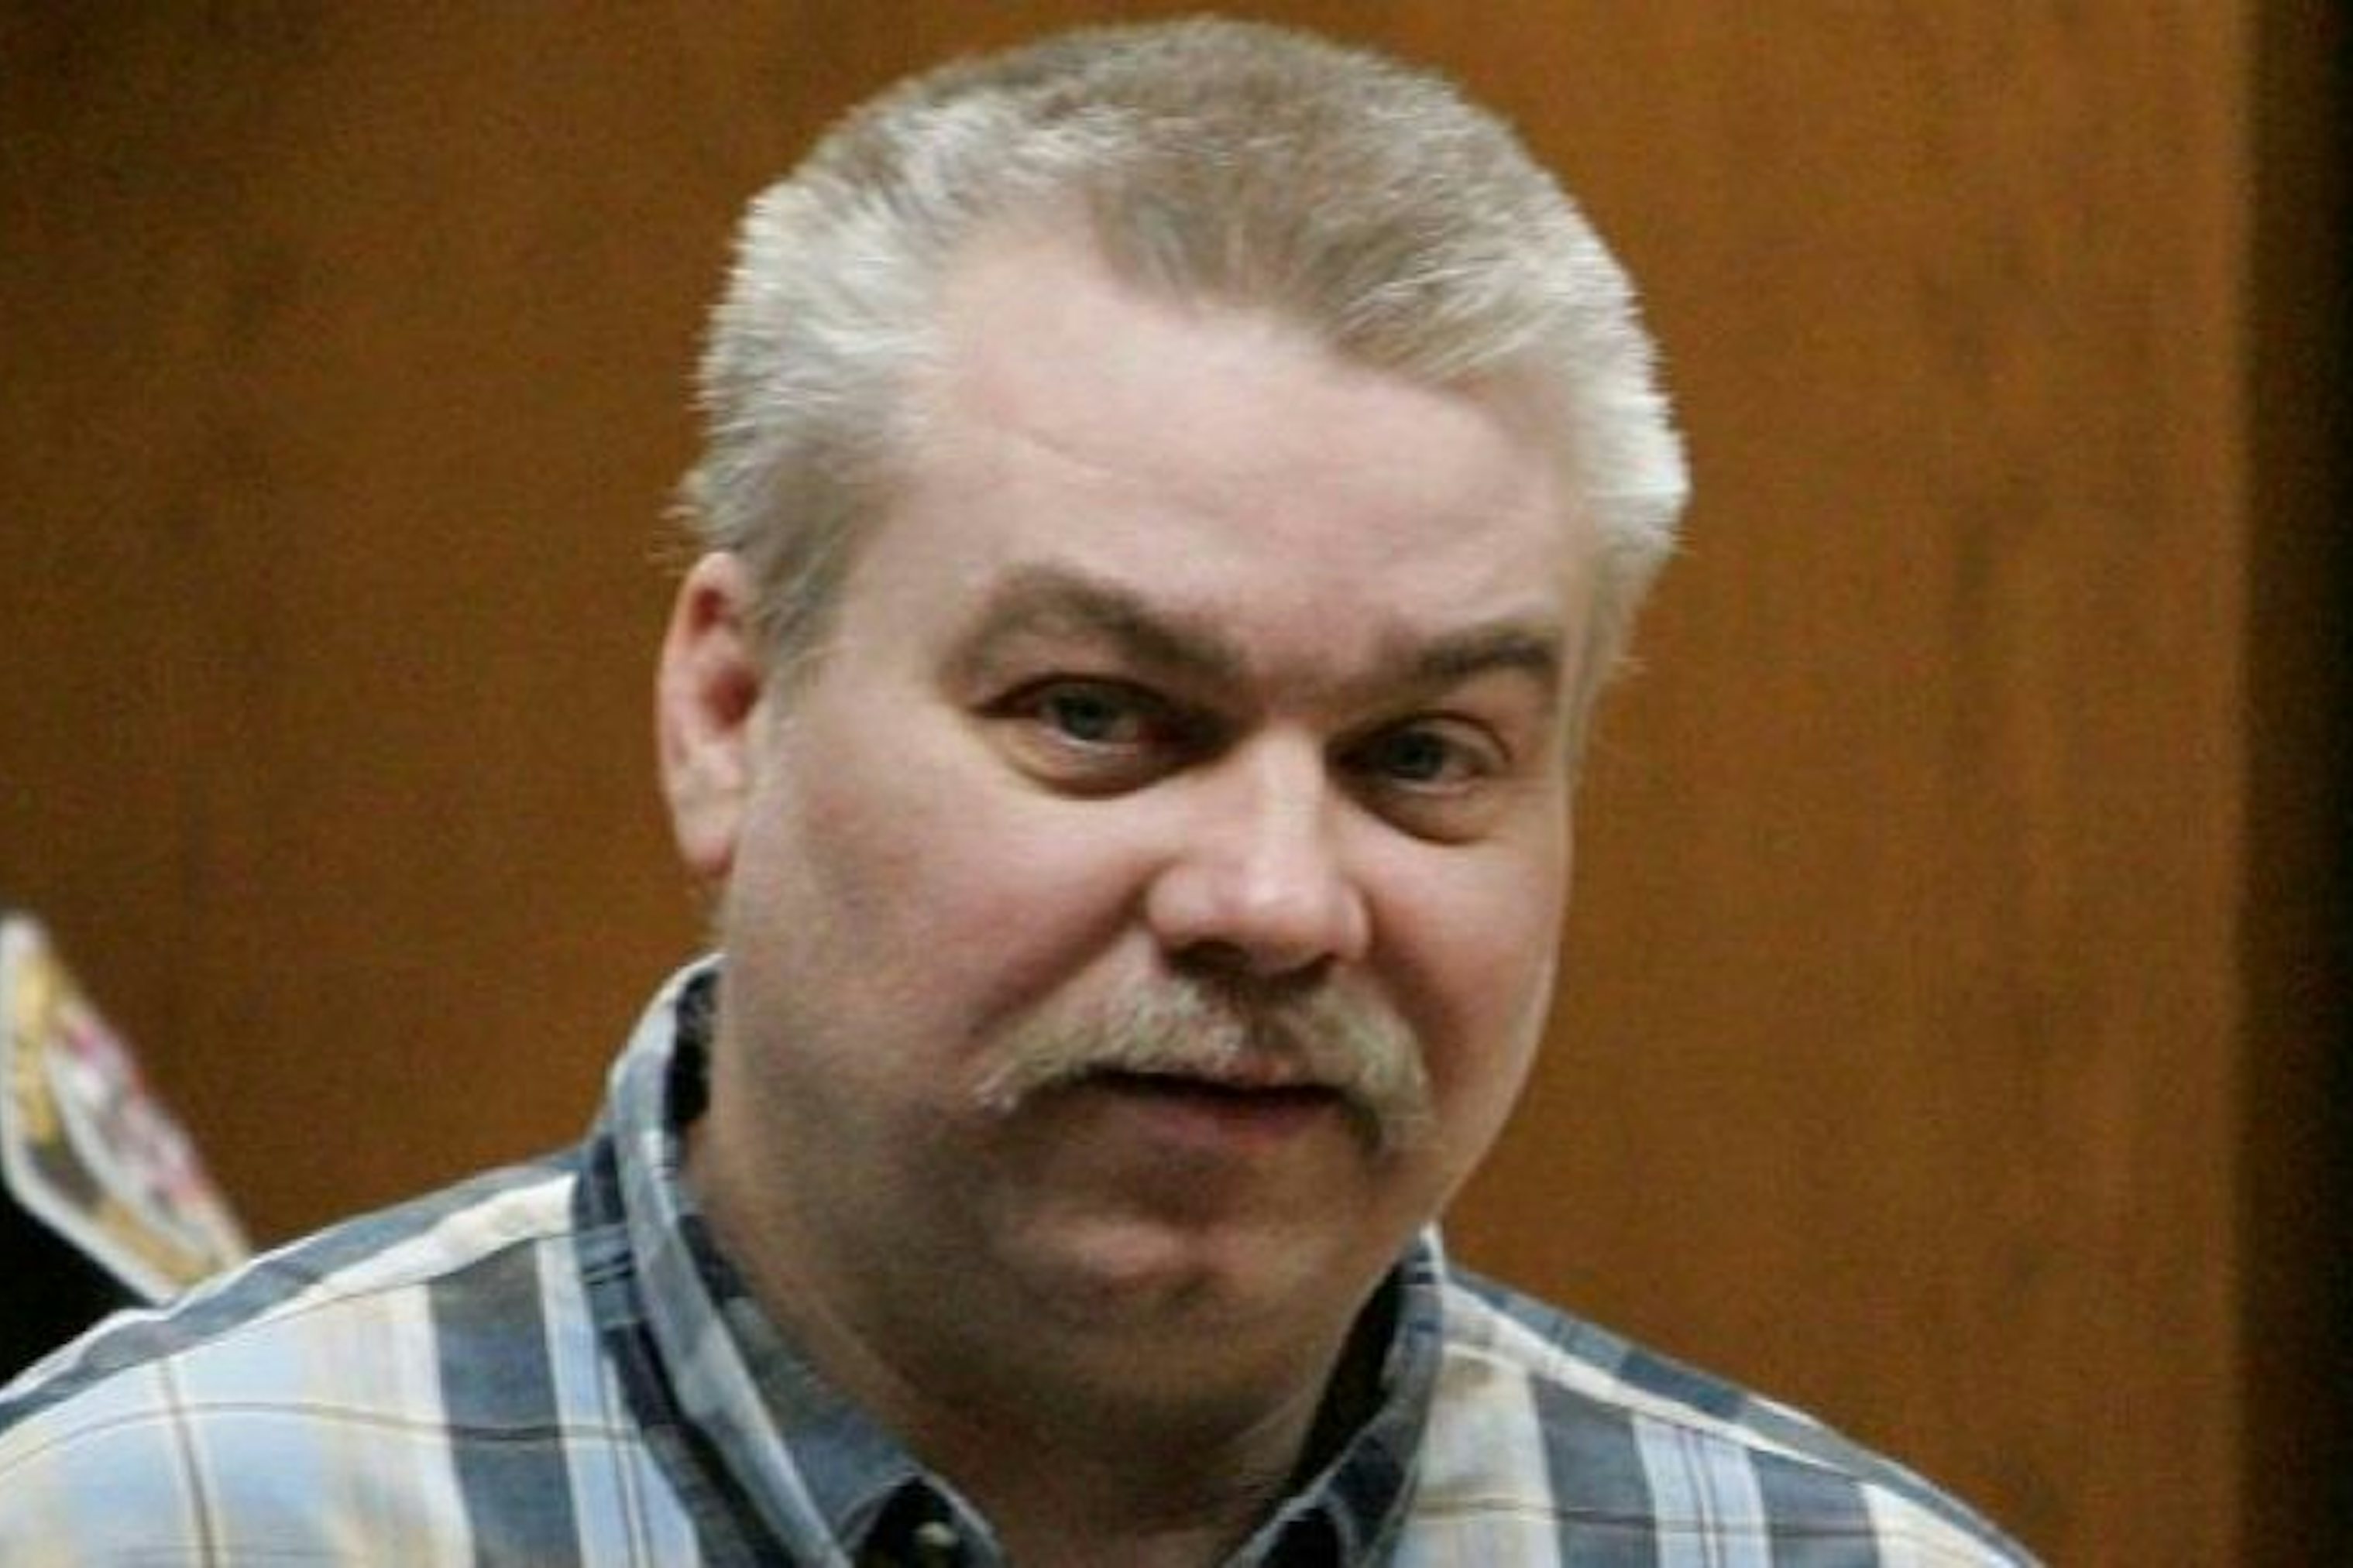 One of the jurors in Steven Averyâ€™s trial is now recanting his guilty ...